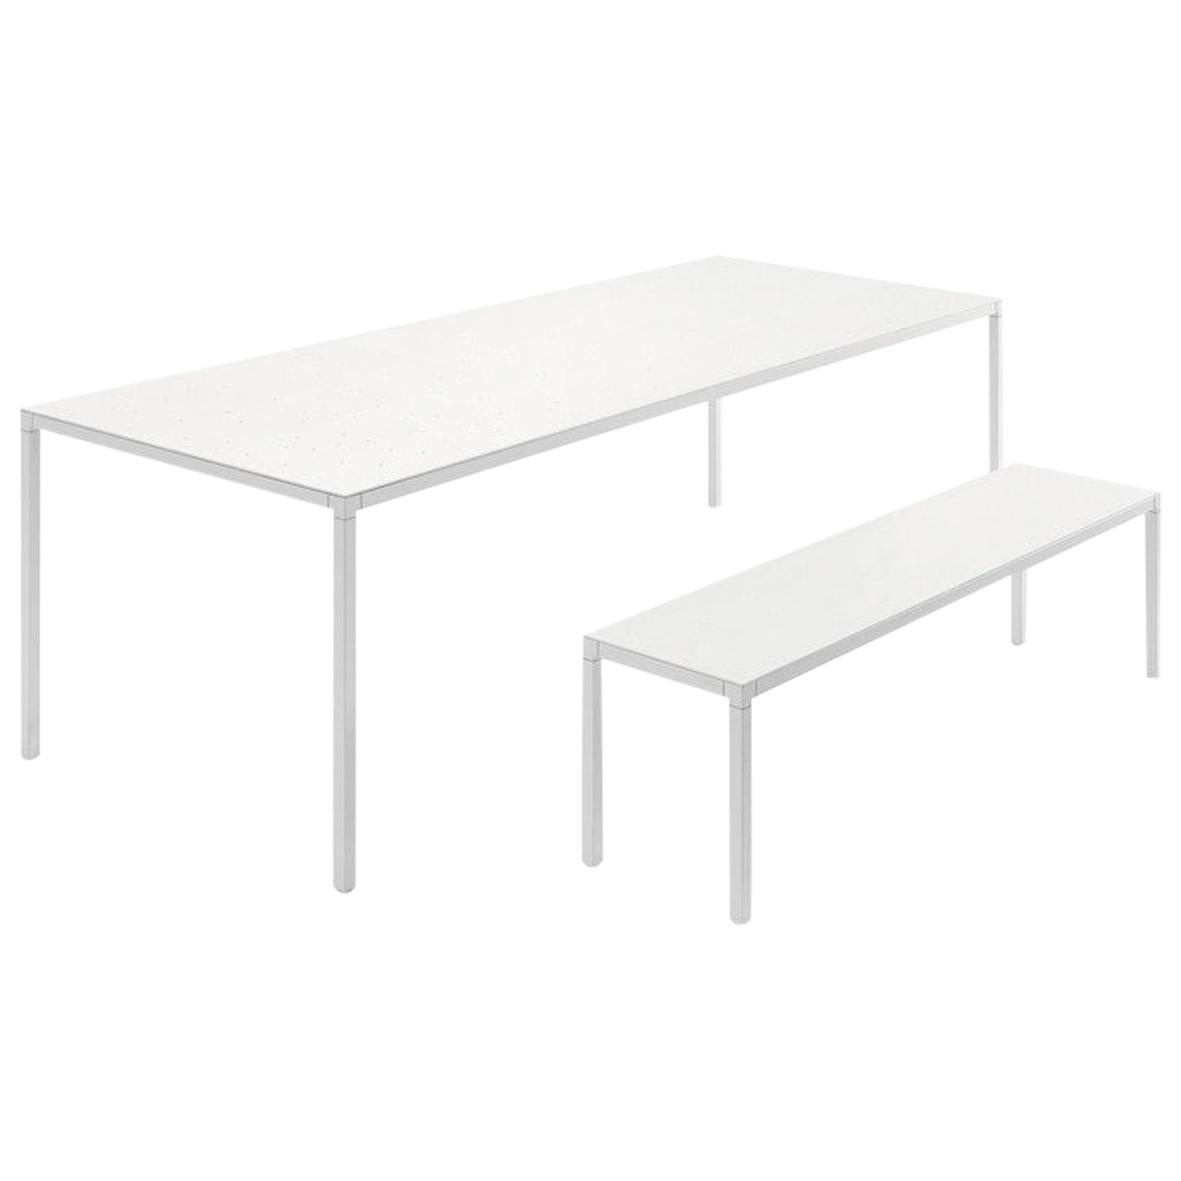 Desalto Helsinki 35 Outdoor Table with Bench by Caronni + Bonanomi For Sale